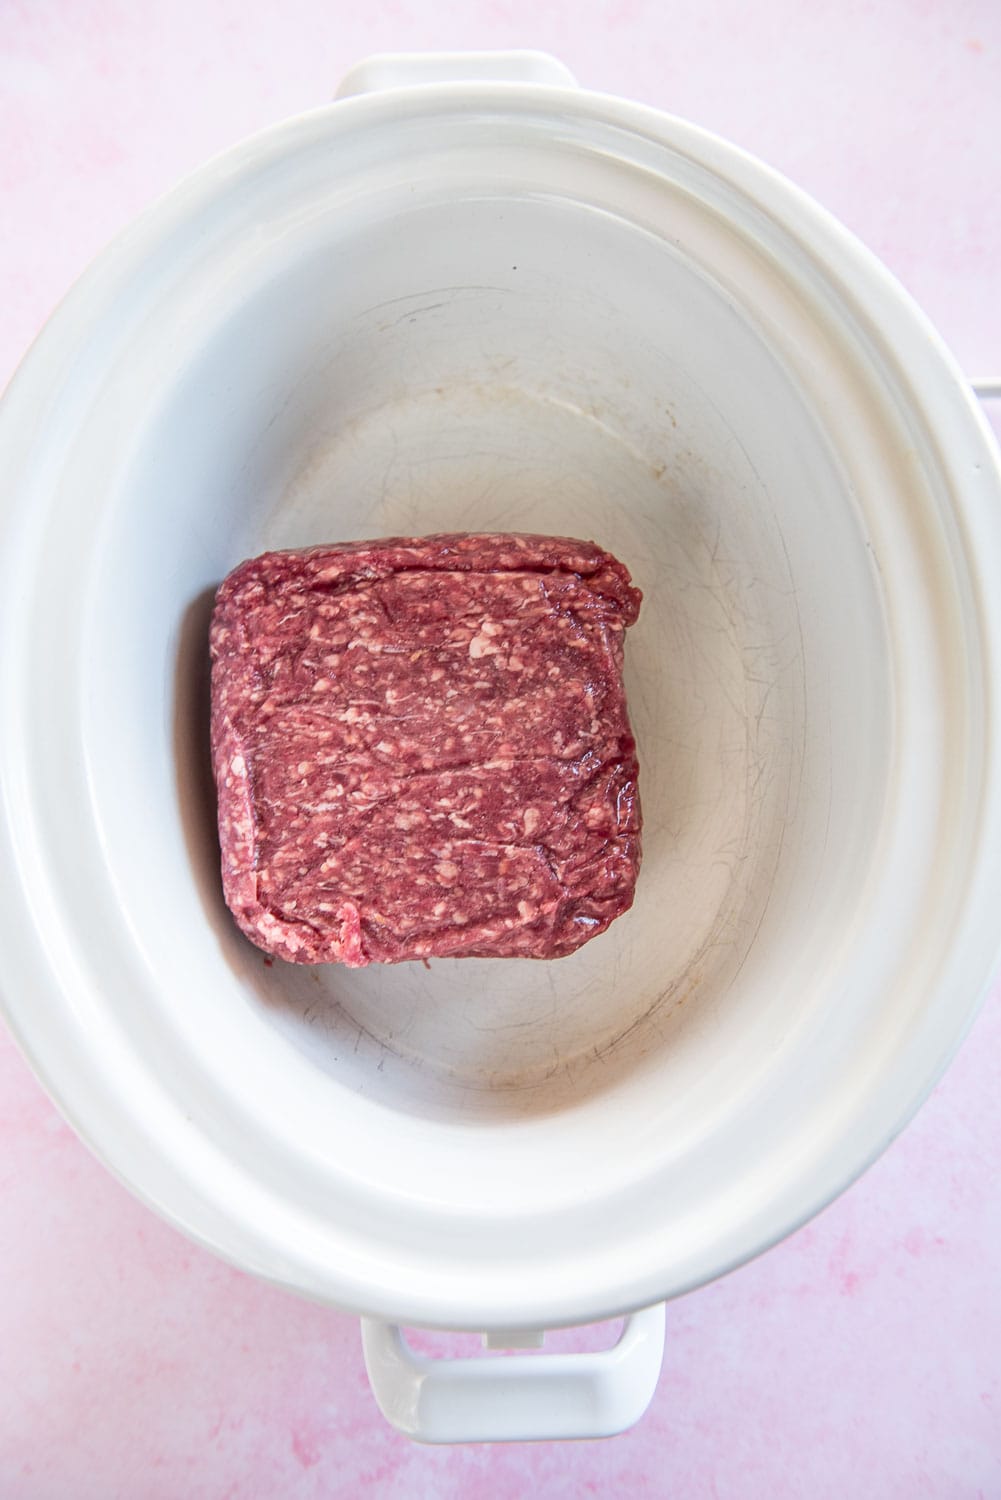 Raw pack of ground beef inside white slow cooker bowl